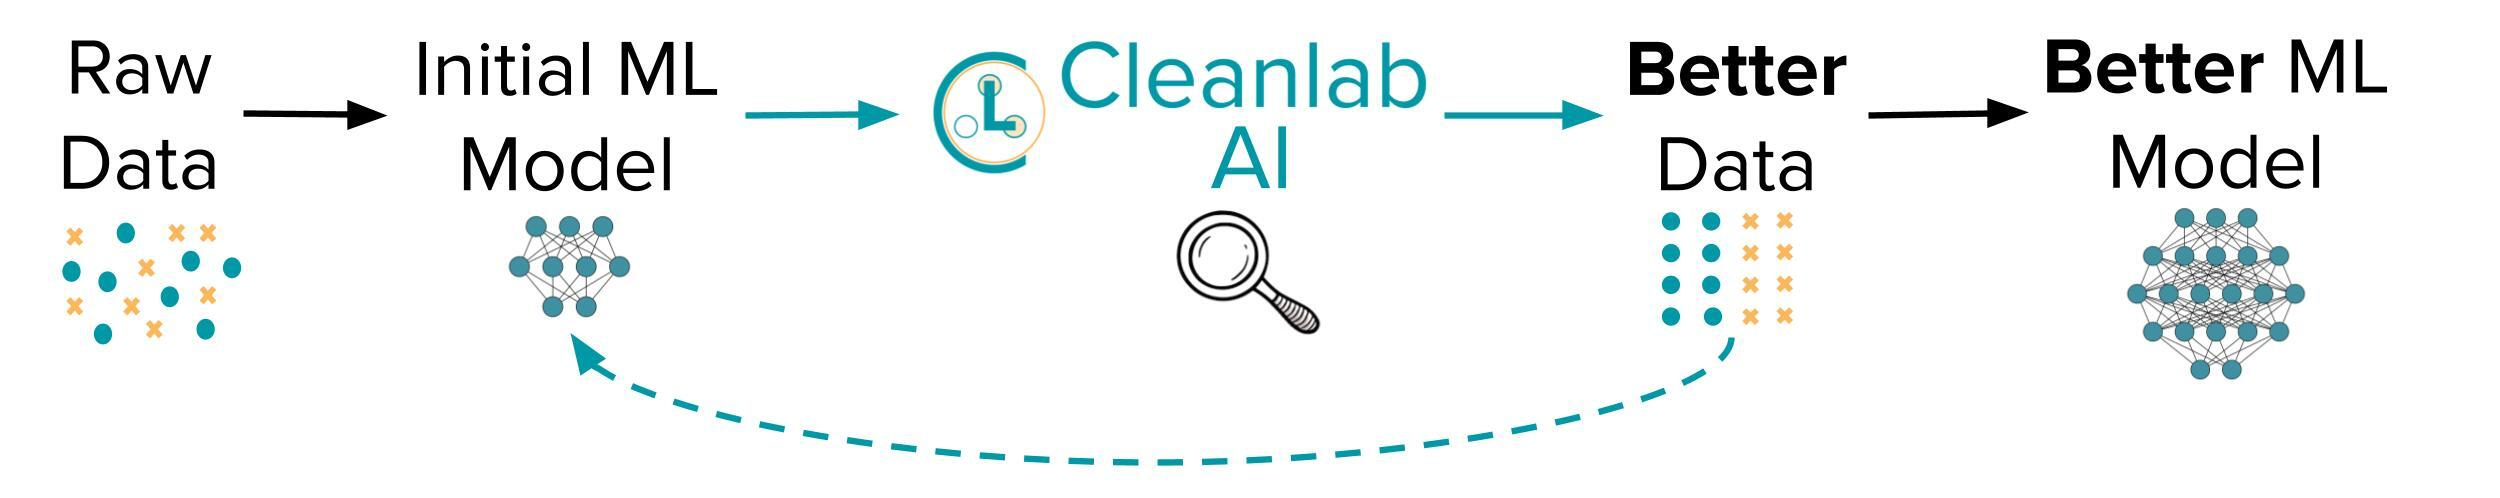 Overview of data/model improvement with Cleanlab